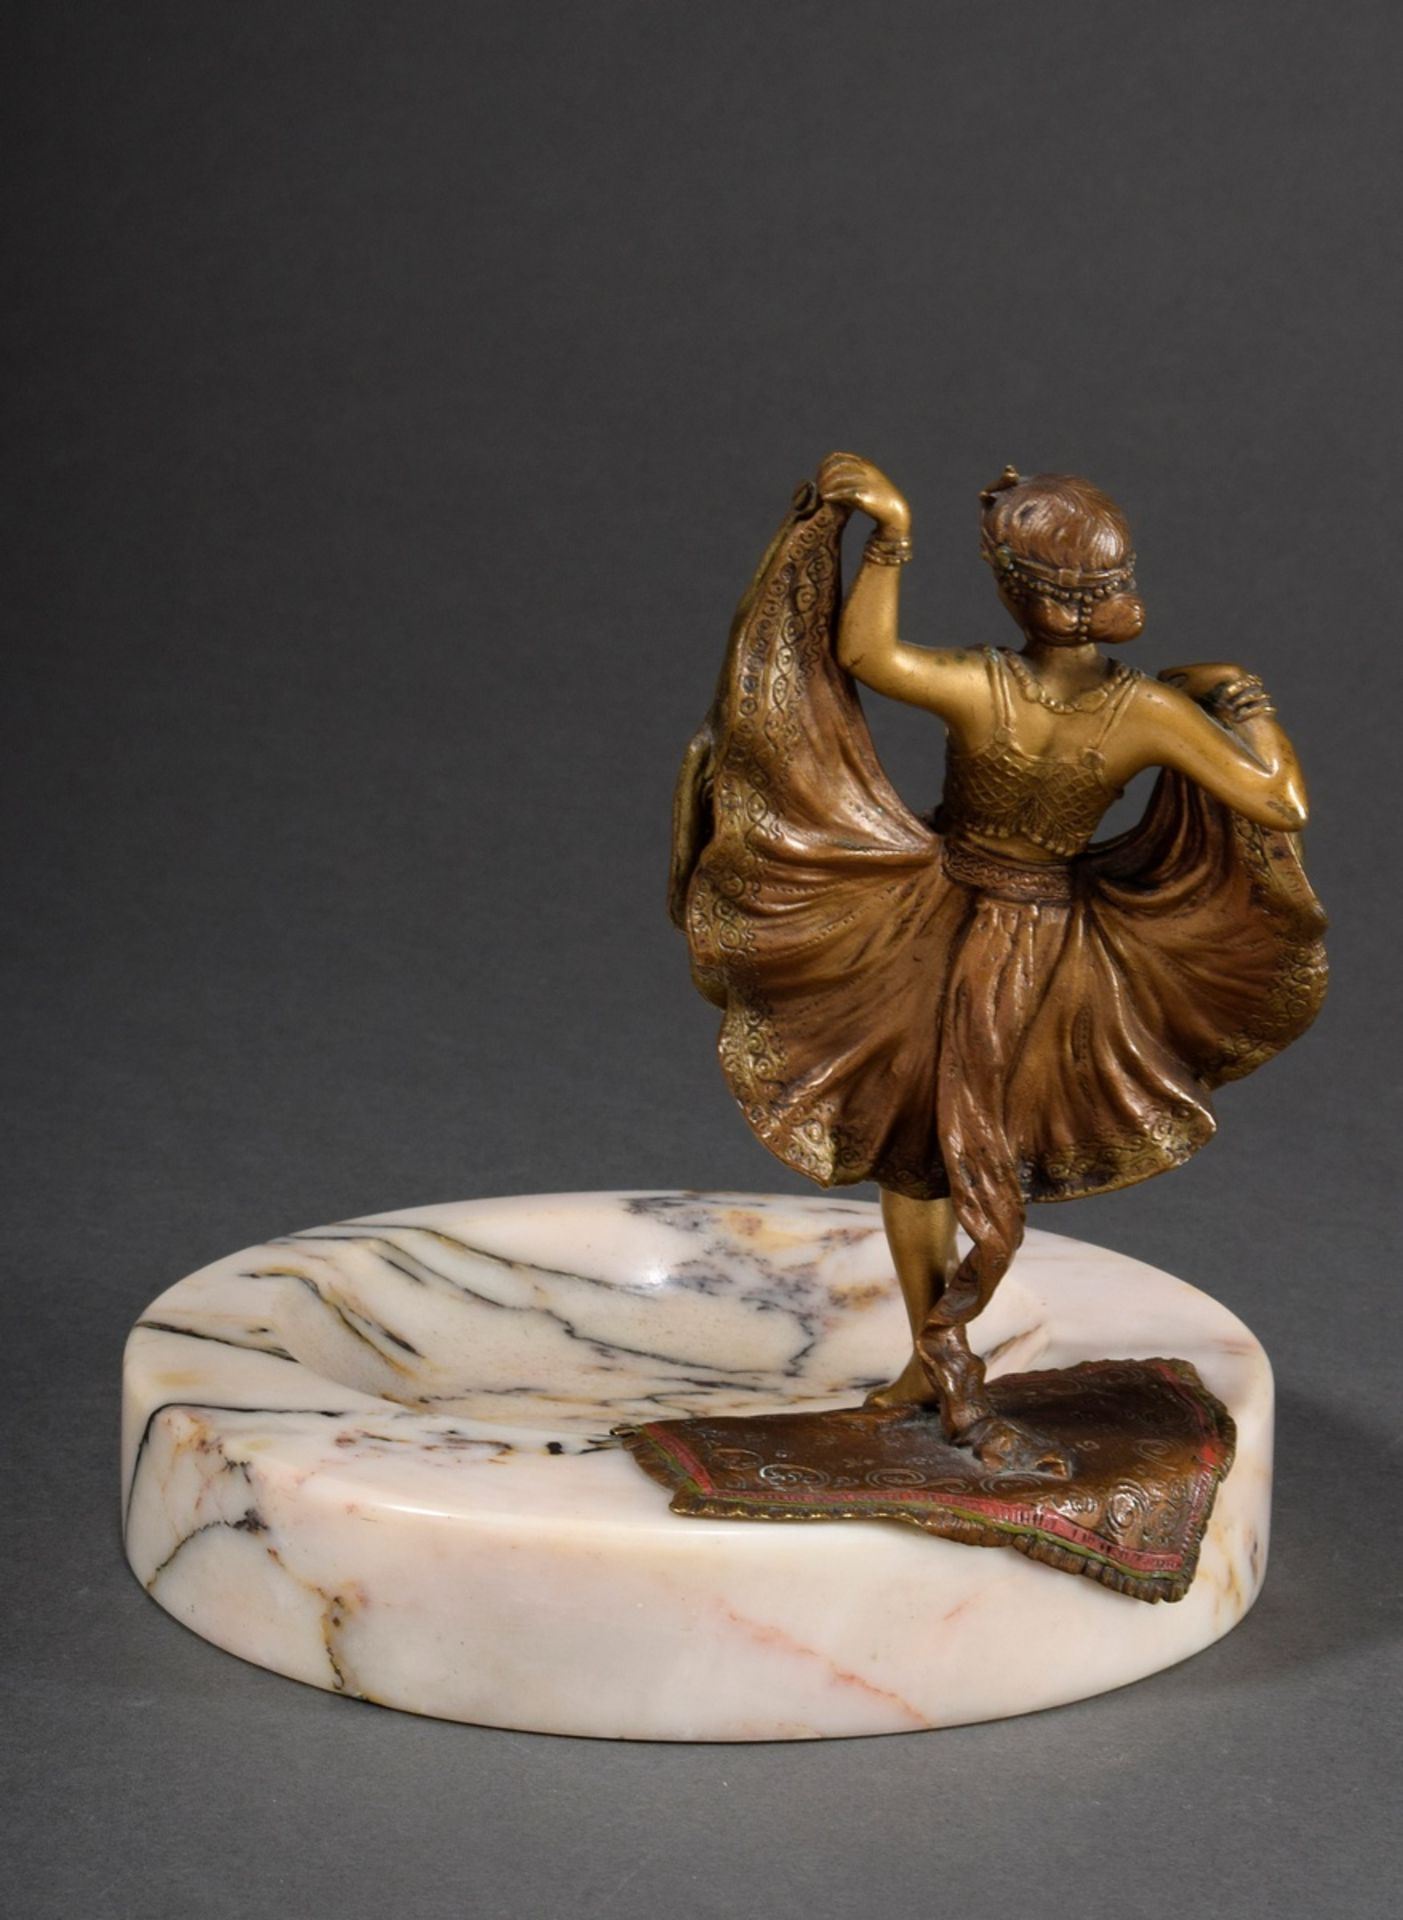 Marble business card tray with Viennese bronze figure "Erotic dancer with folding skirt", discreetl - Image 4 of 9